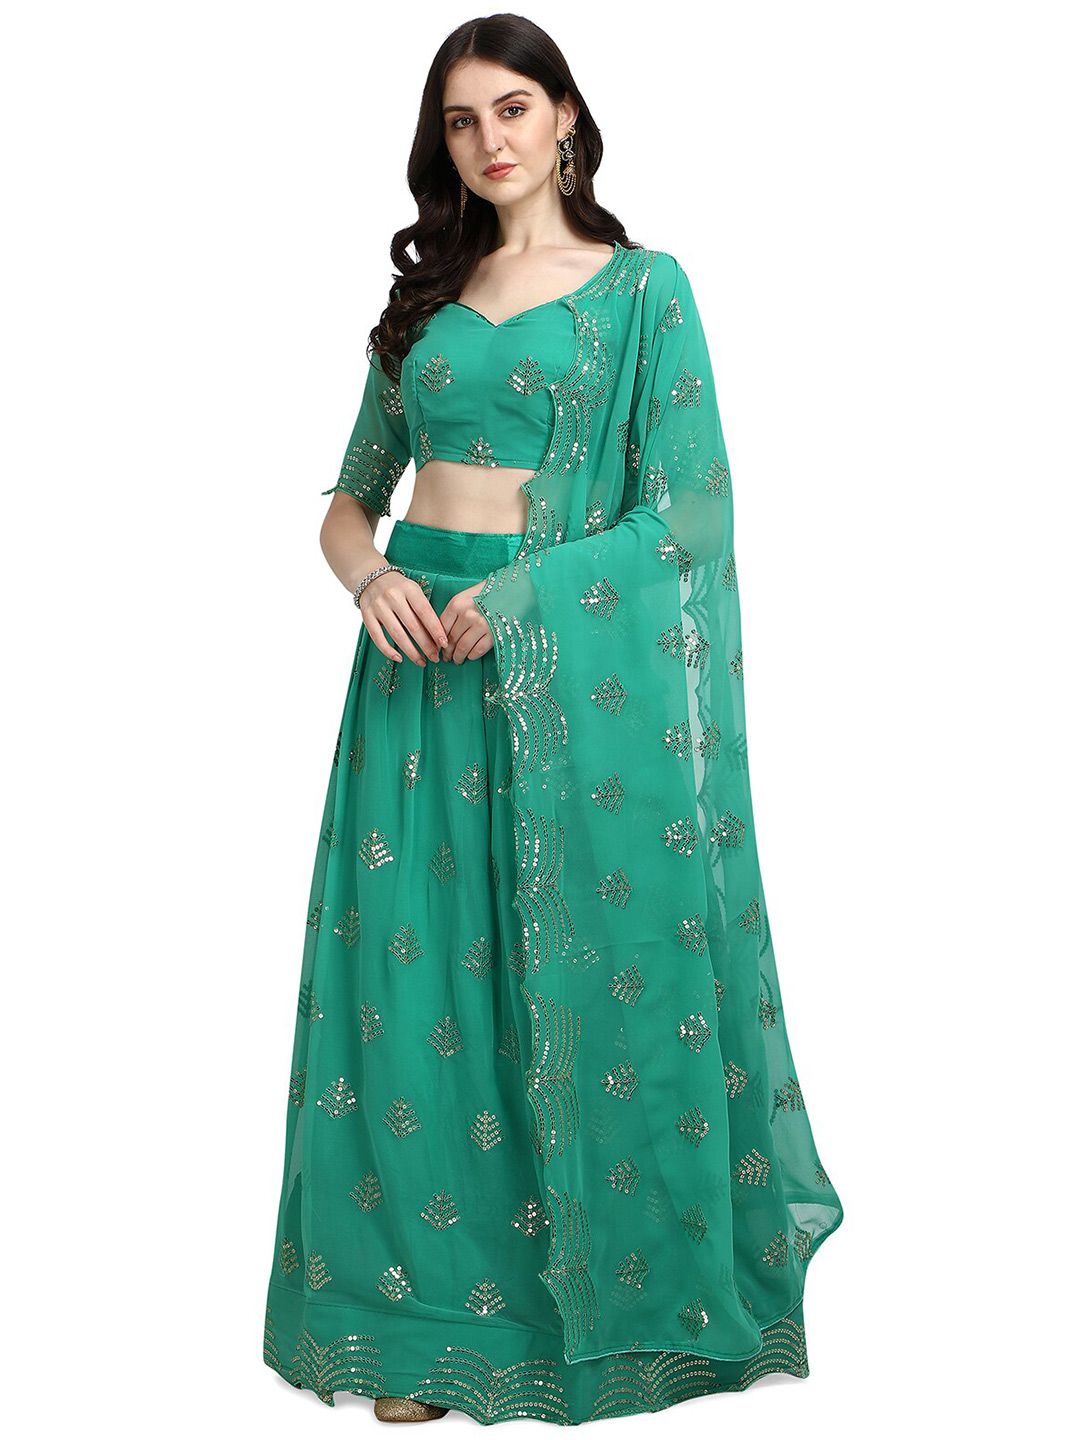 Pratham Blue Green Embellished Sequinned Semi-Stitched Lehenga & Unstitched Blouse With Dupatta Price in India